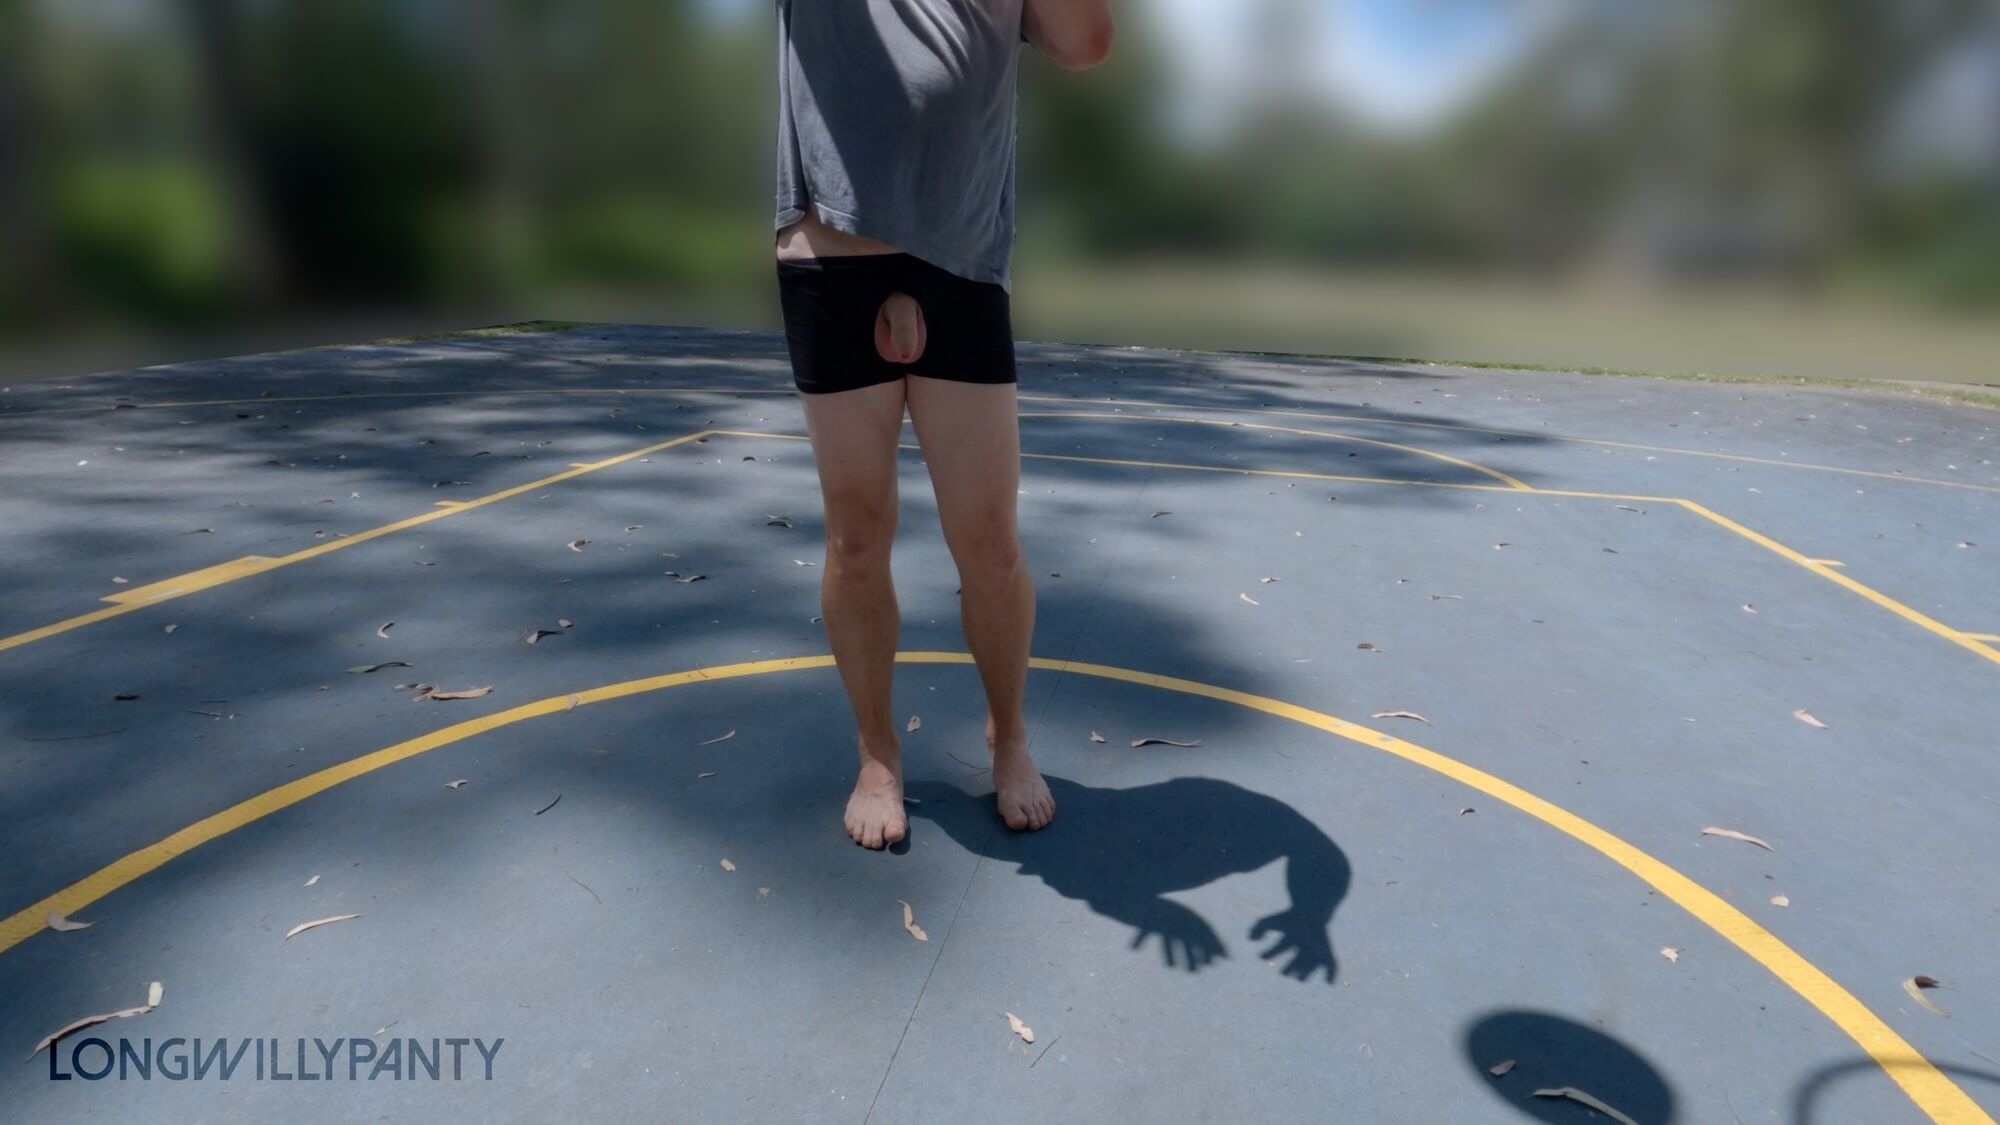 Cock out basketball - new location #7